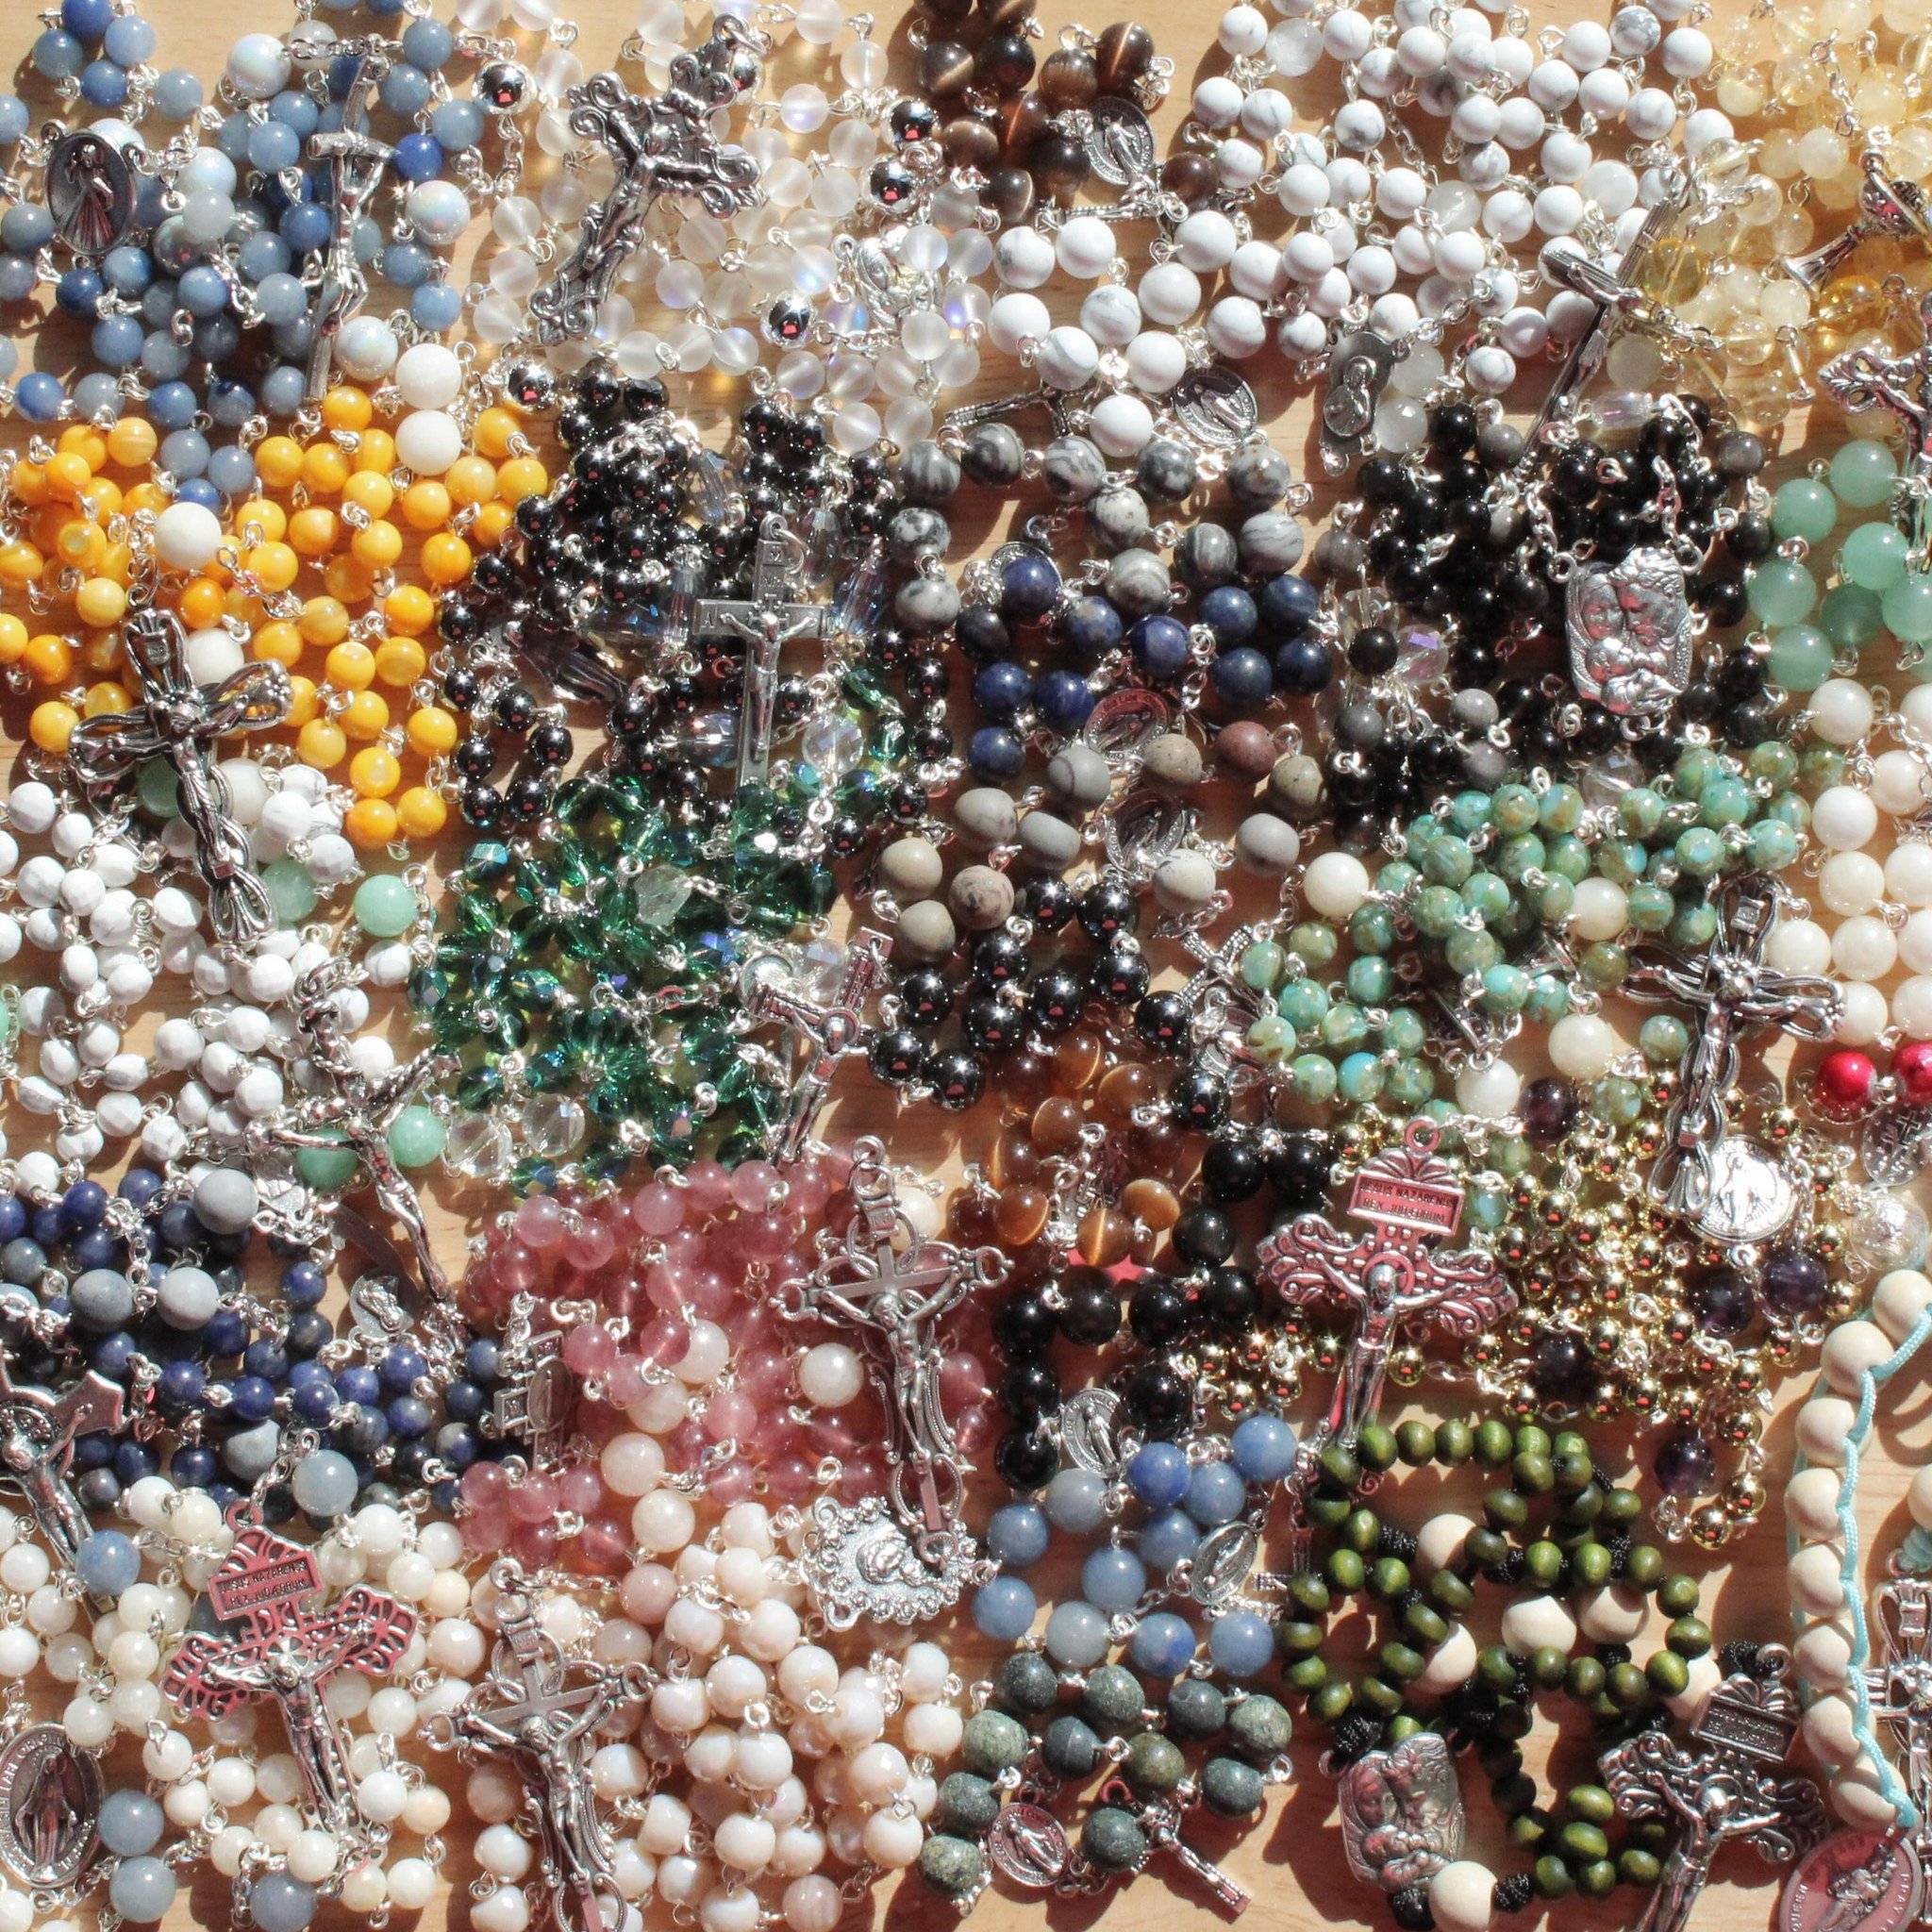 All caught up on rosary orders! 

If you are ever in the market for a custom rosary, I would be happy to make one for you!
https://www.mikaylaruthcatherine.com/customized-request

And I have ready-made rosaries and chaplets available through my onlin